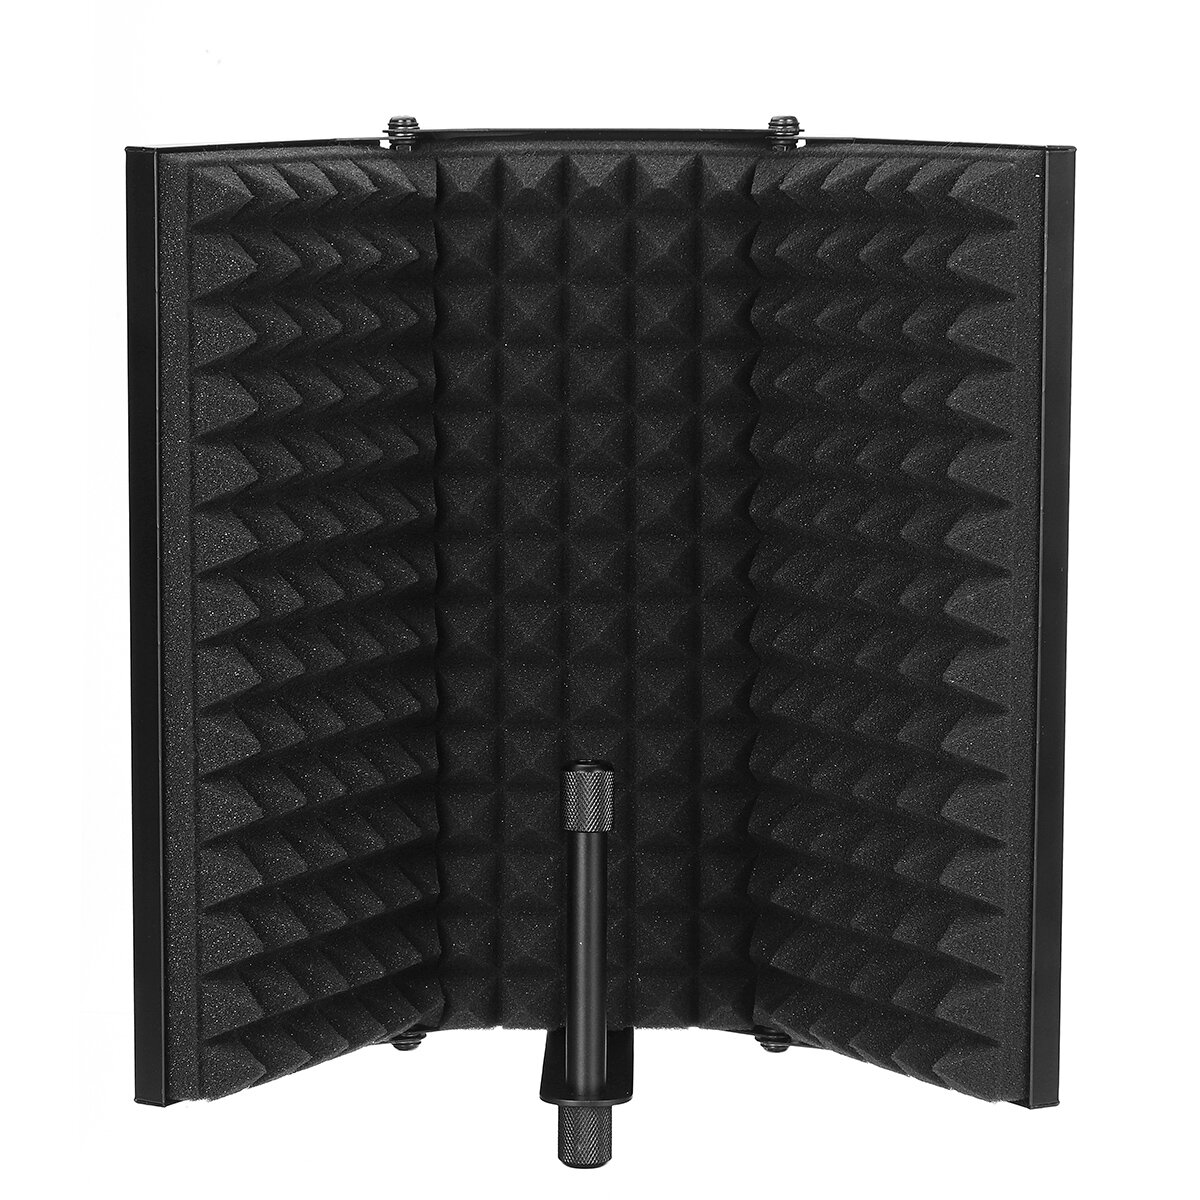 Image of Foldable Microphone Acoustic Isolation Shield Acoustic Foams Studio Three-door Noise Enclosure Panel Filter